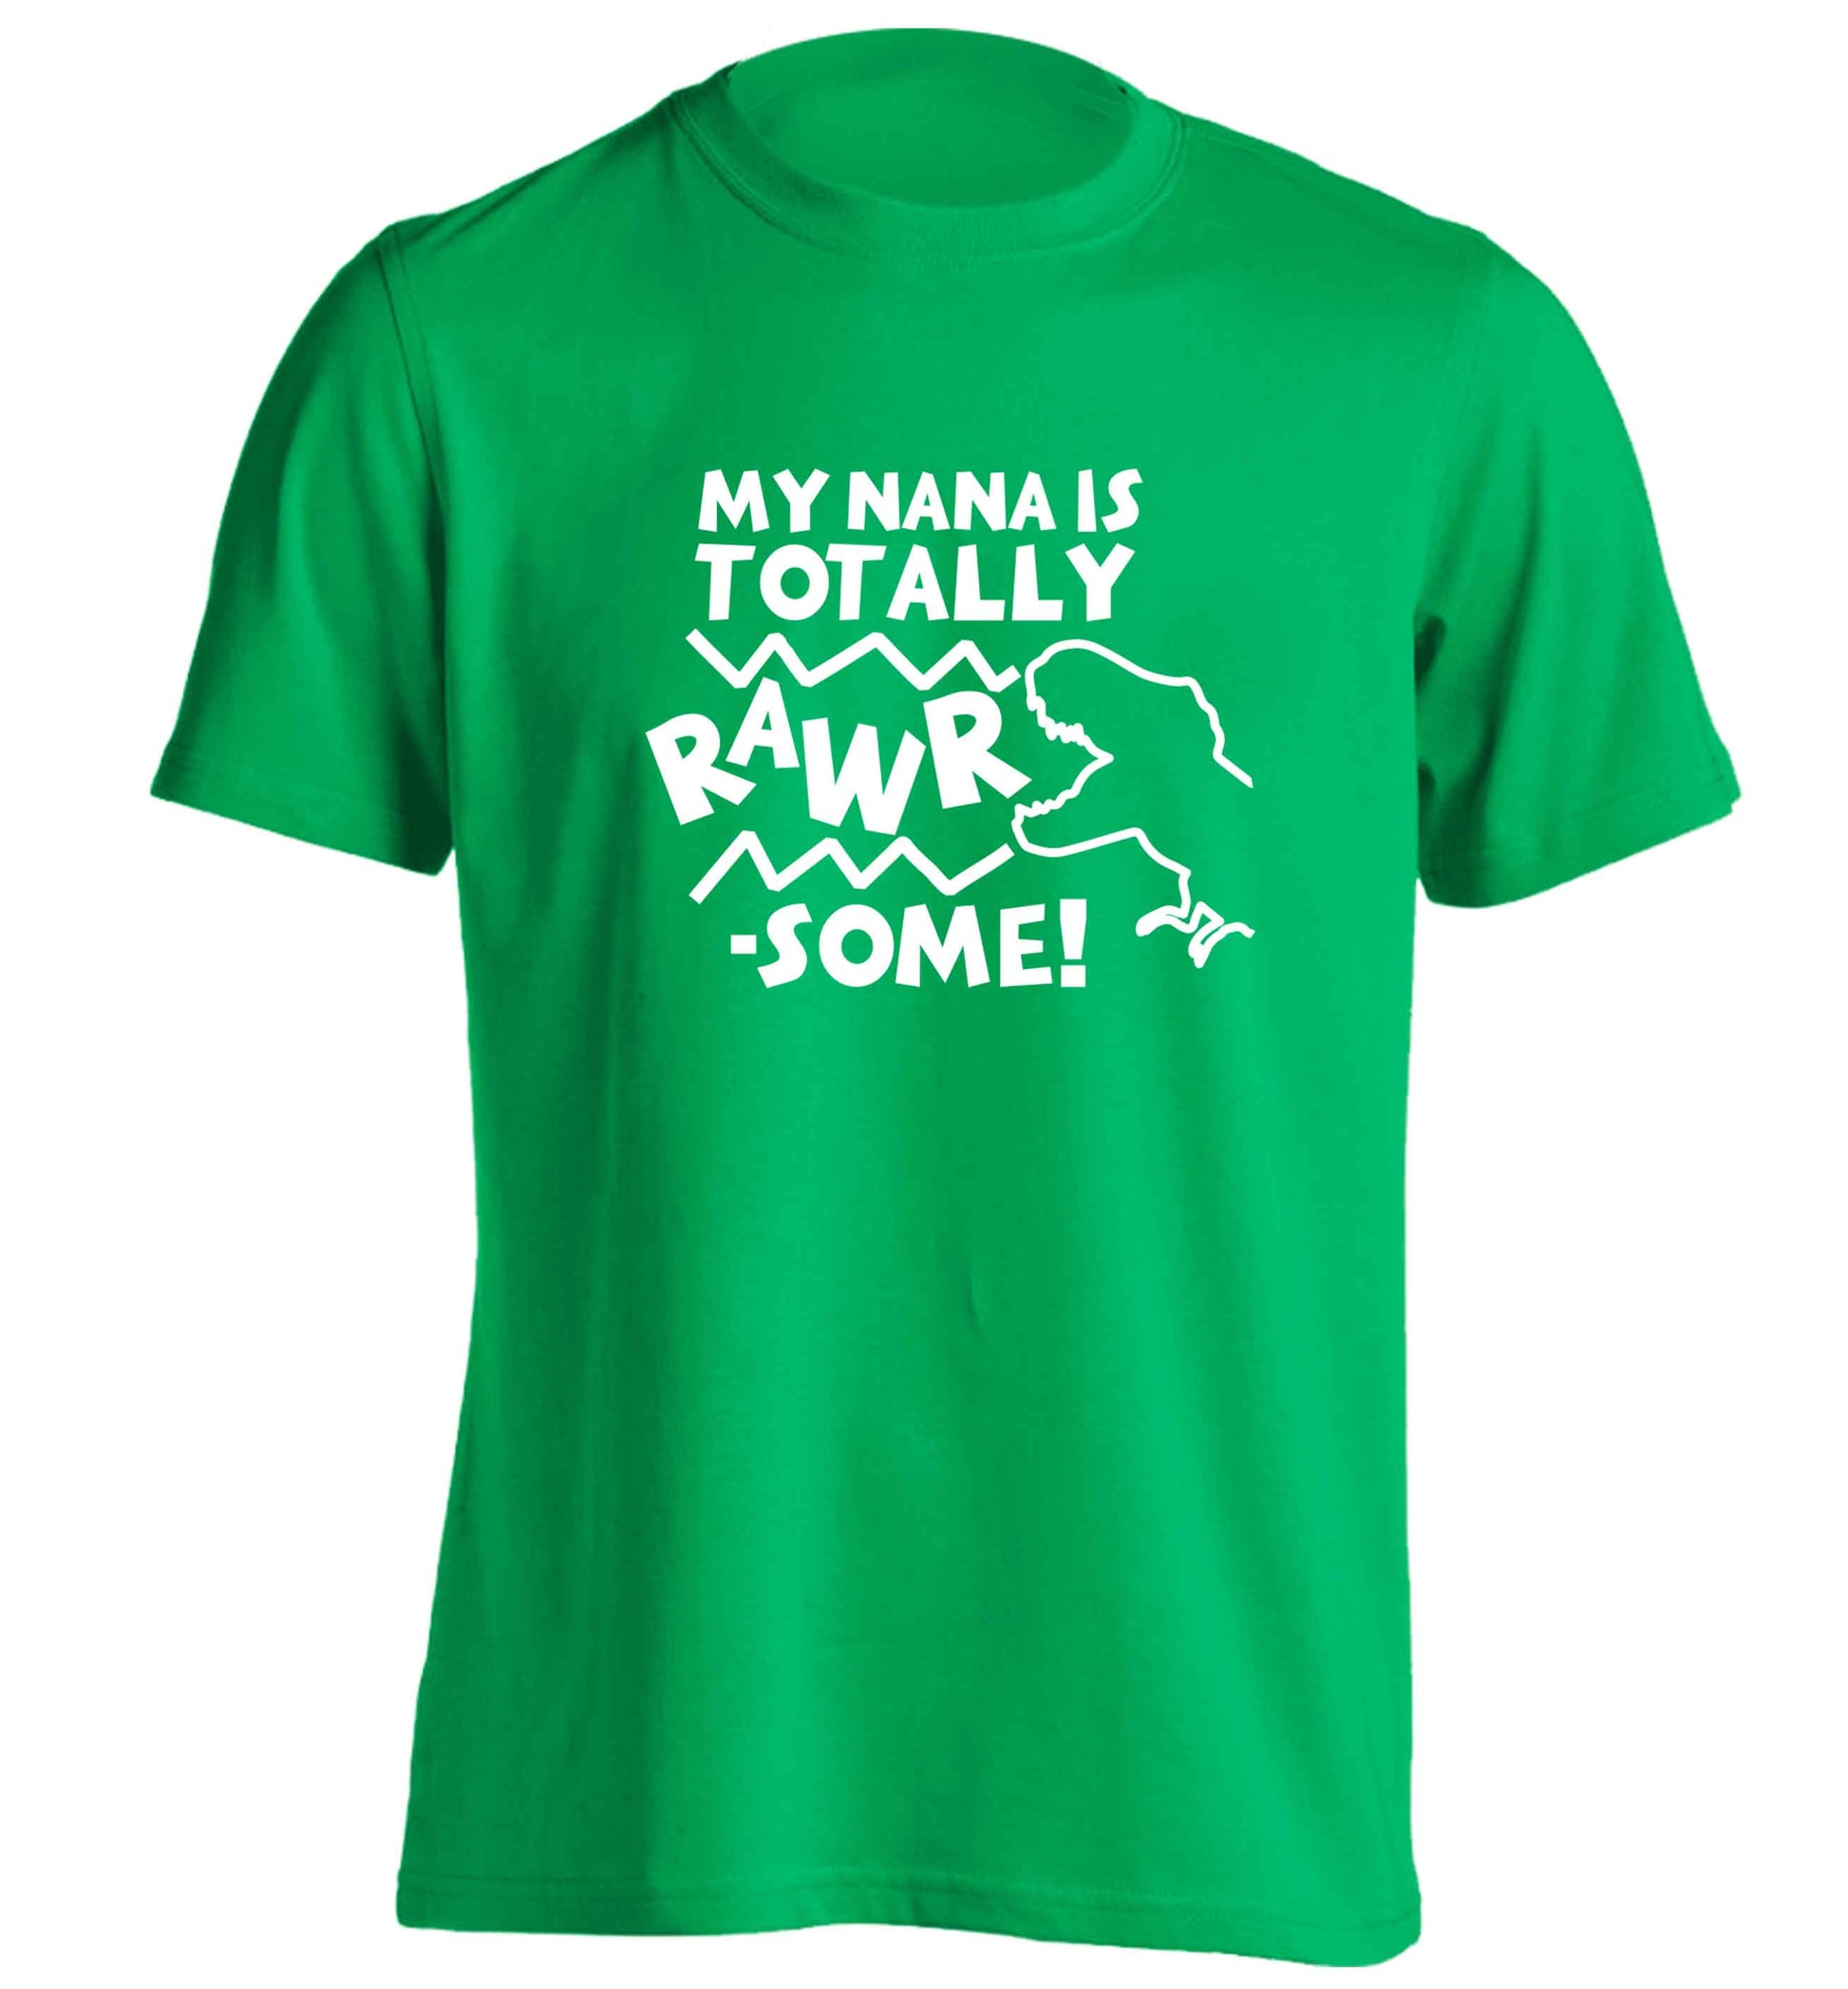 My nana is totally rawrsome adults unisex green Tshirt small